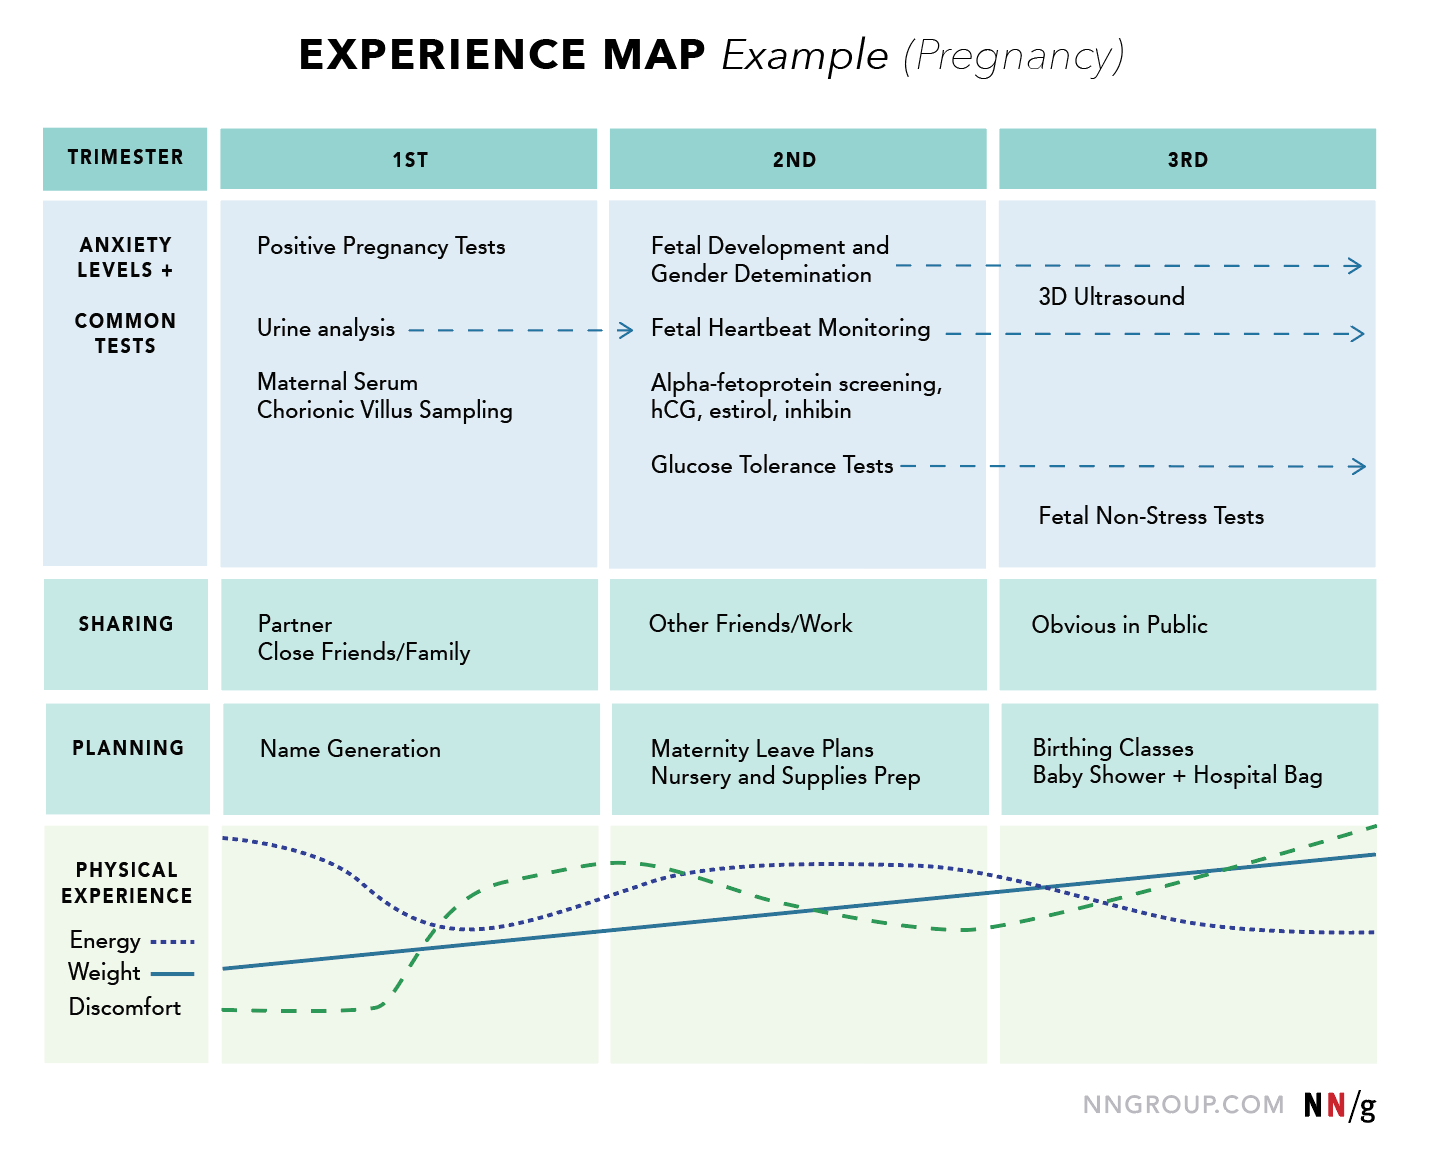 Experience map example